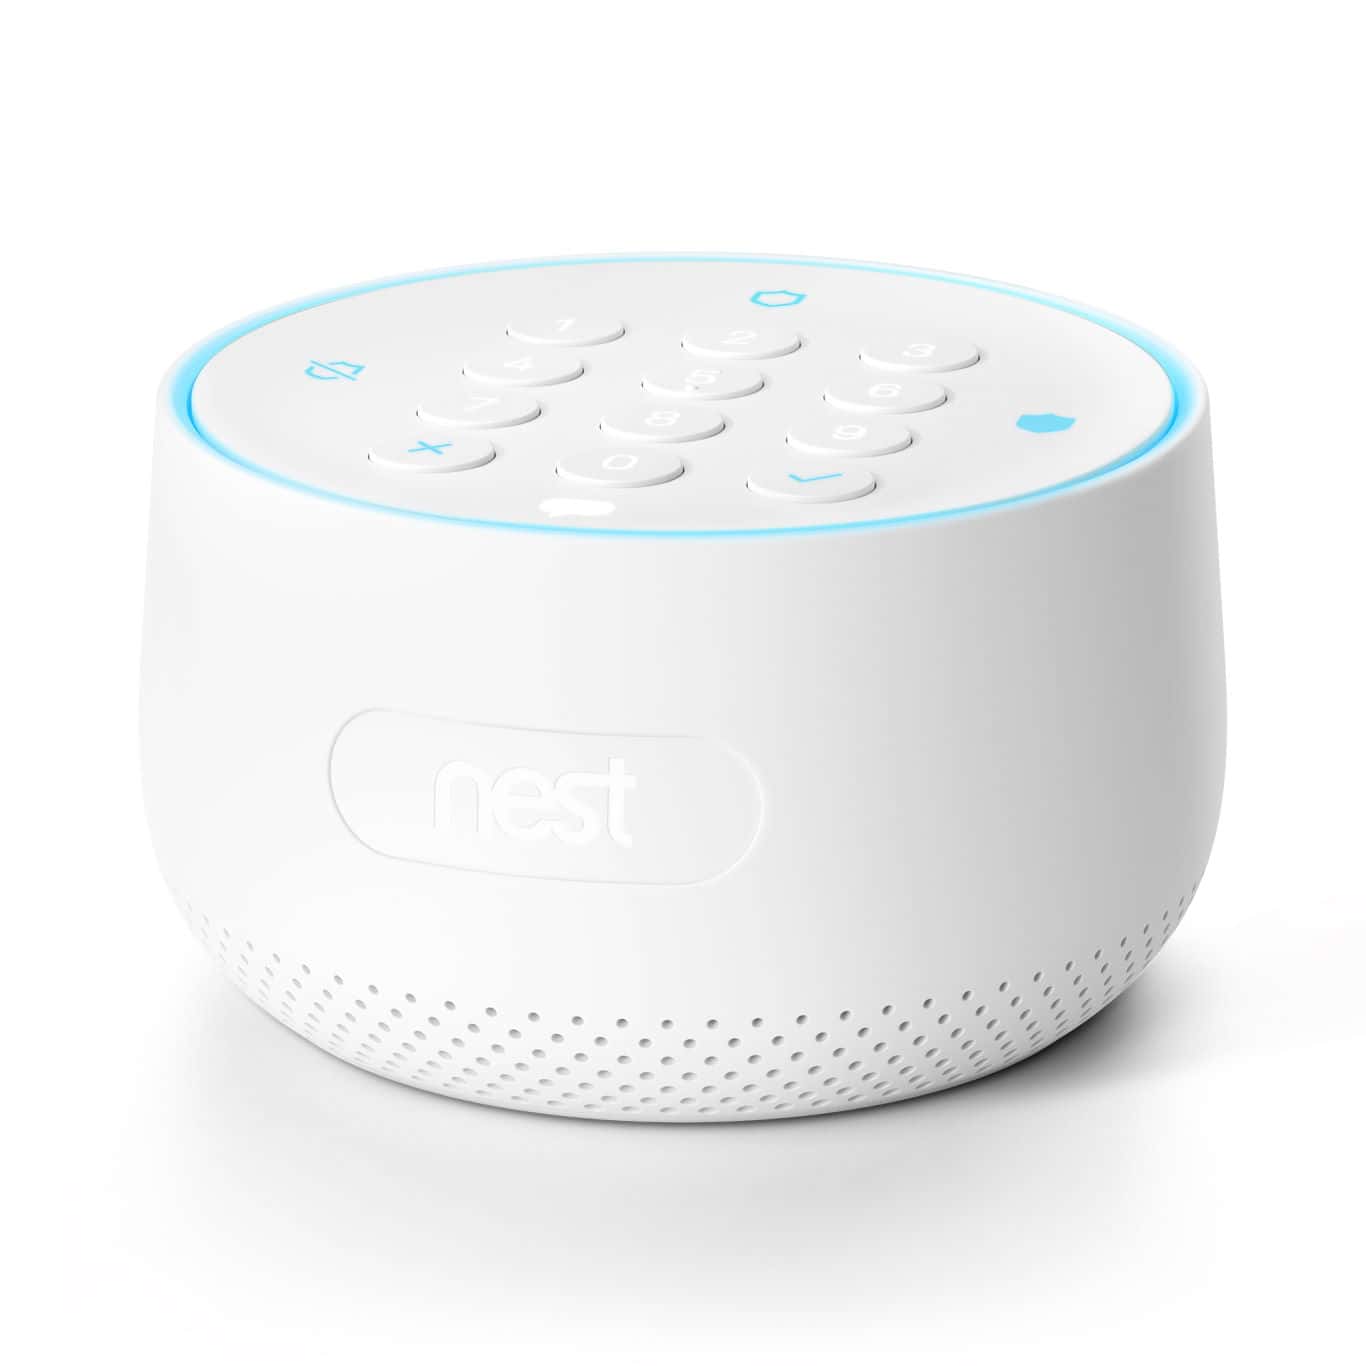 nest home security kit